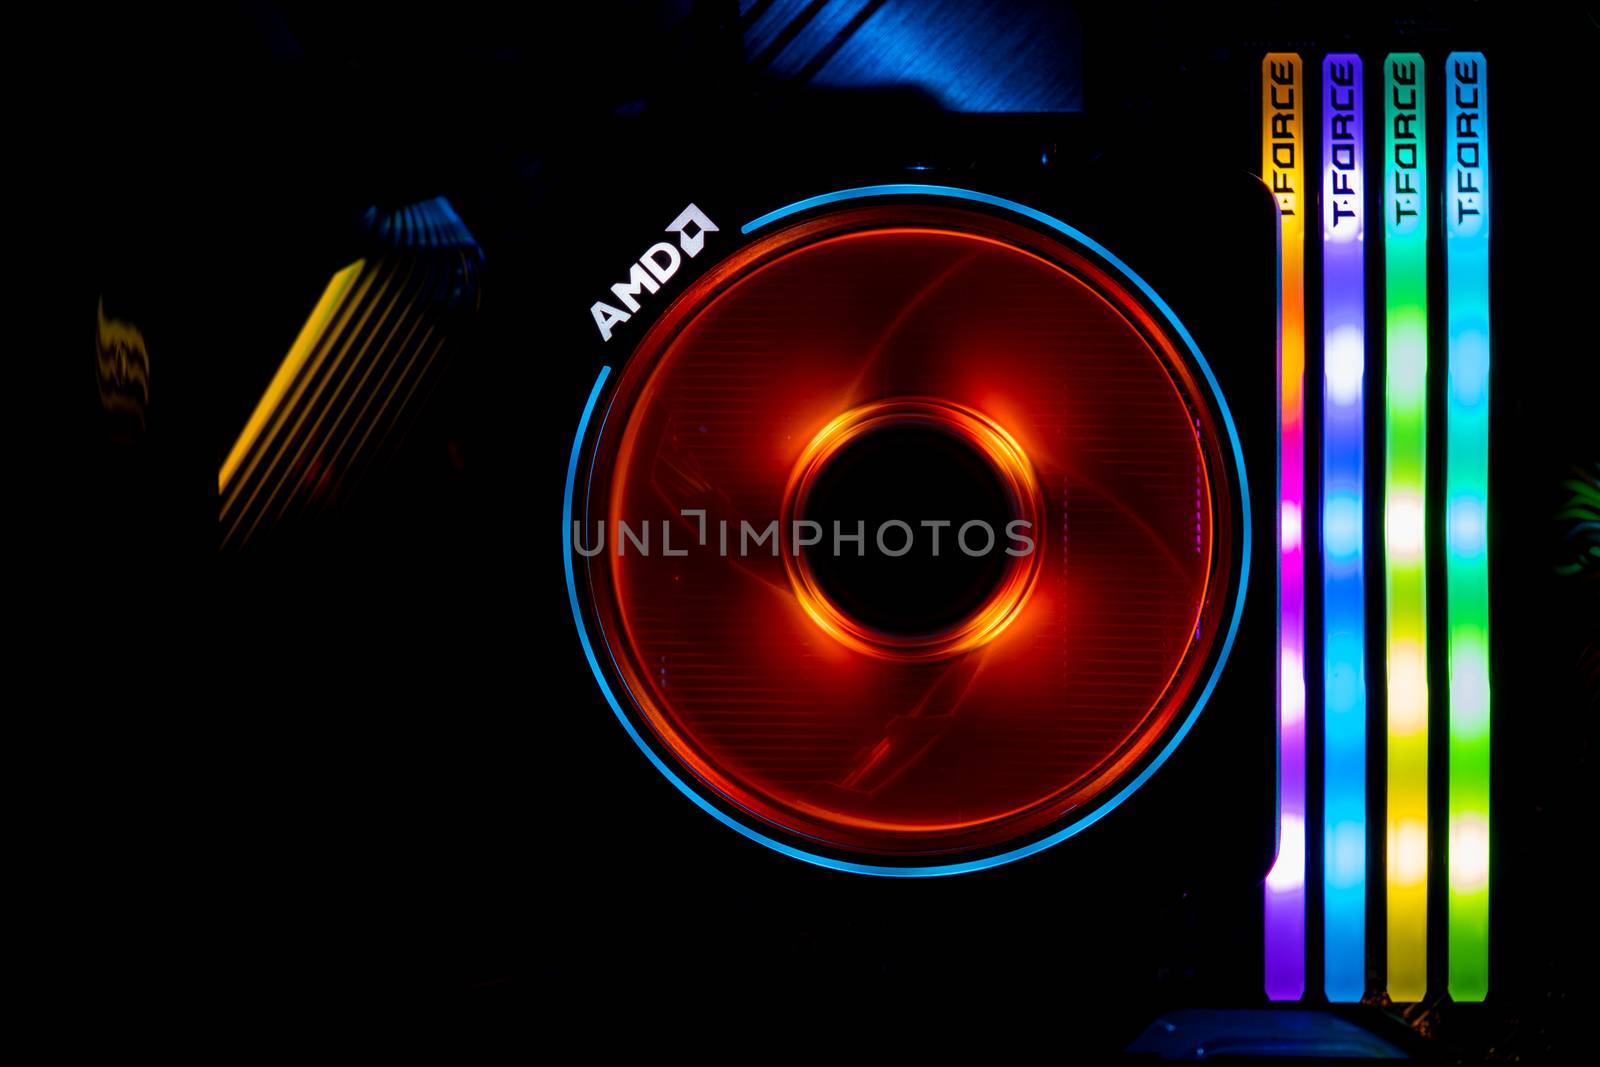 Chonburi, Thailand - MAY 16, 2020: The colorful of AMD Wraith Prism Cooler for CPU Ryzen 3900X with four T-Force DELTA RGB DDR4 DIMMs in the computer case.Chonburi, Thailand - MAY 16, 2020: The colorful of AMD Wraith Prism Cooler for CPU Ryzen9 3900X with four T-Force DELTA RGB DDR4 DIMMs in the computer case. by peerapixs